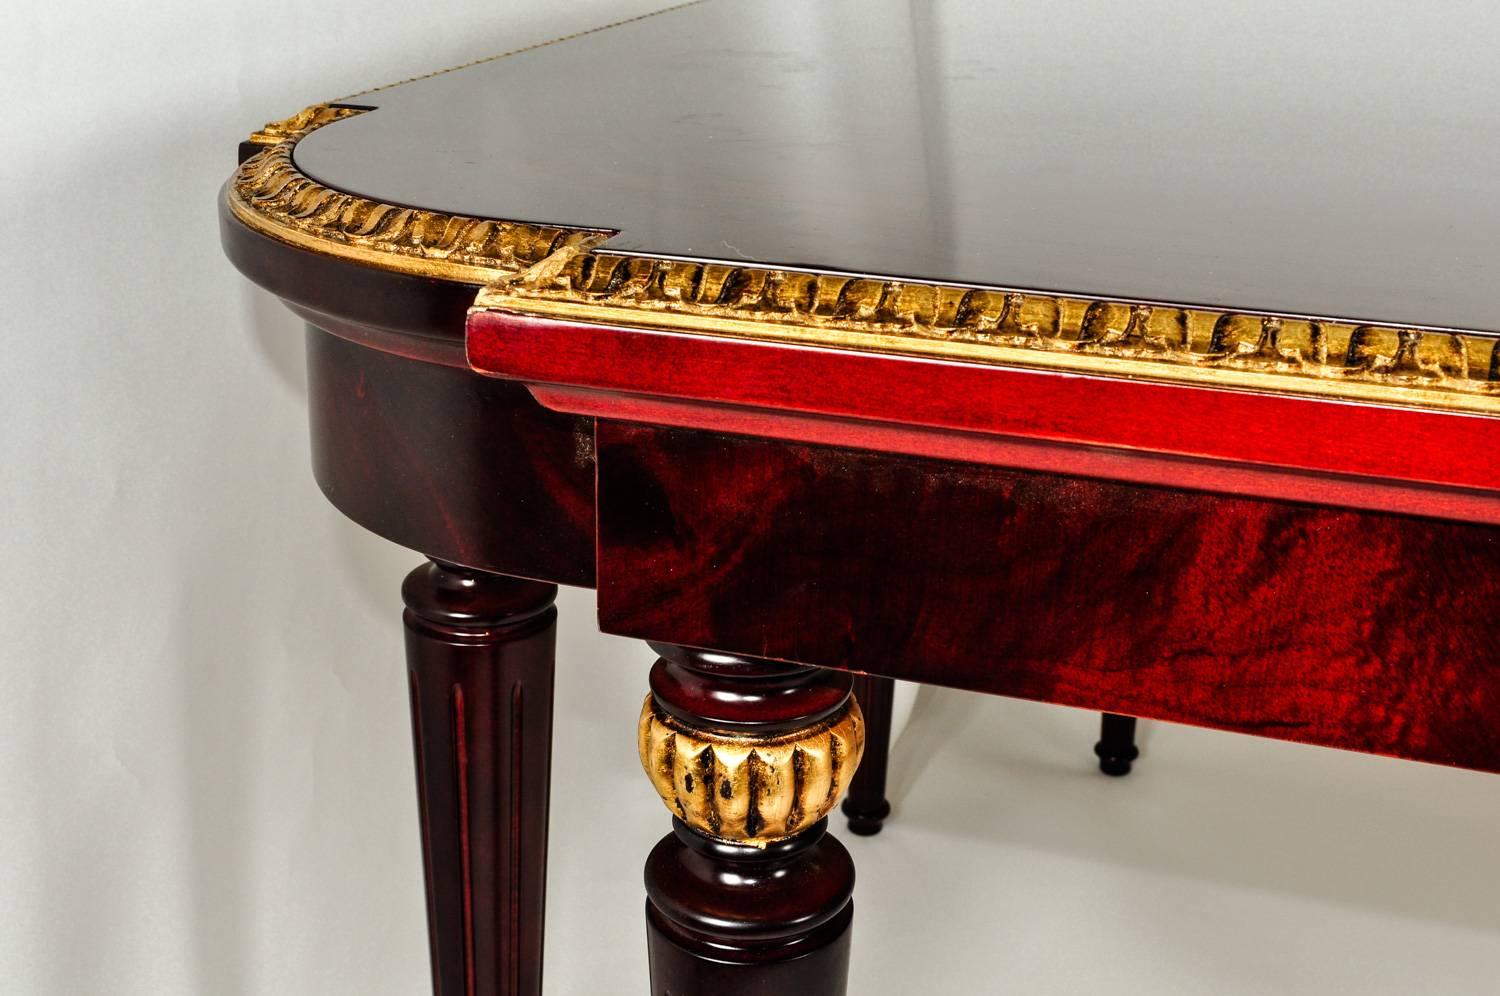 French Solid Mahogany Wood with Hand Carved Gold Leaf Details